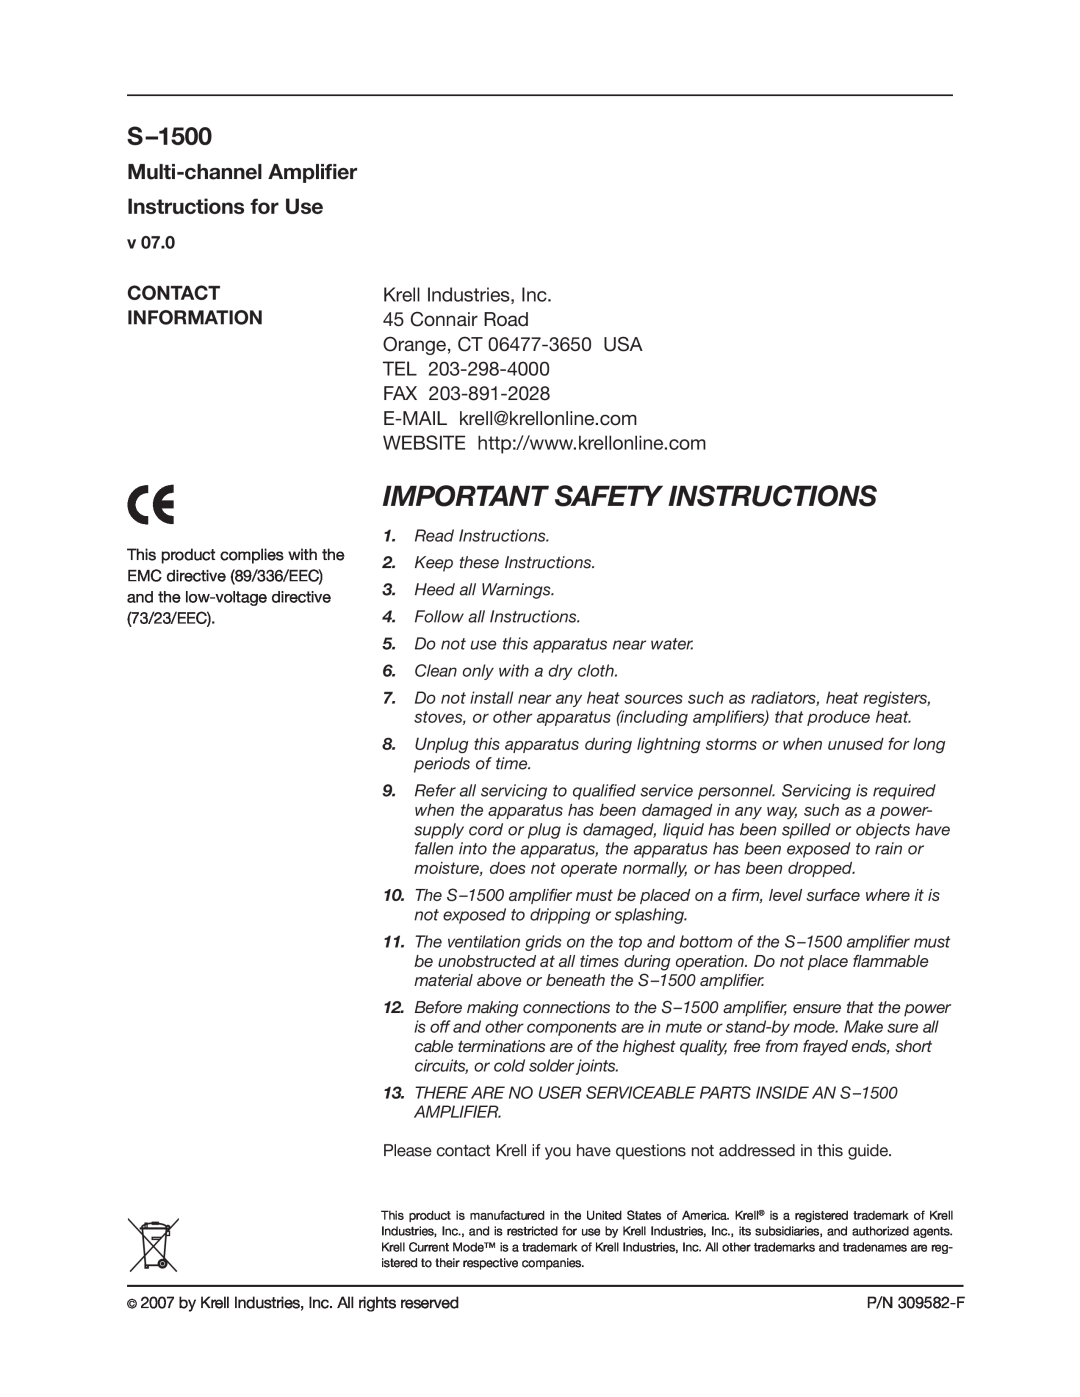 Krell Industries S1500 manual S-1500, Multi-channelAmplifier Instructions for Use, Important Safety Instructions 